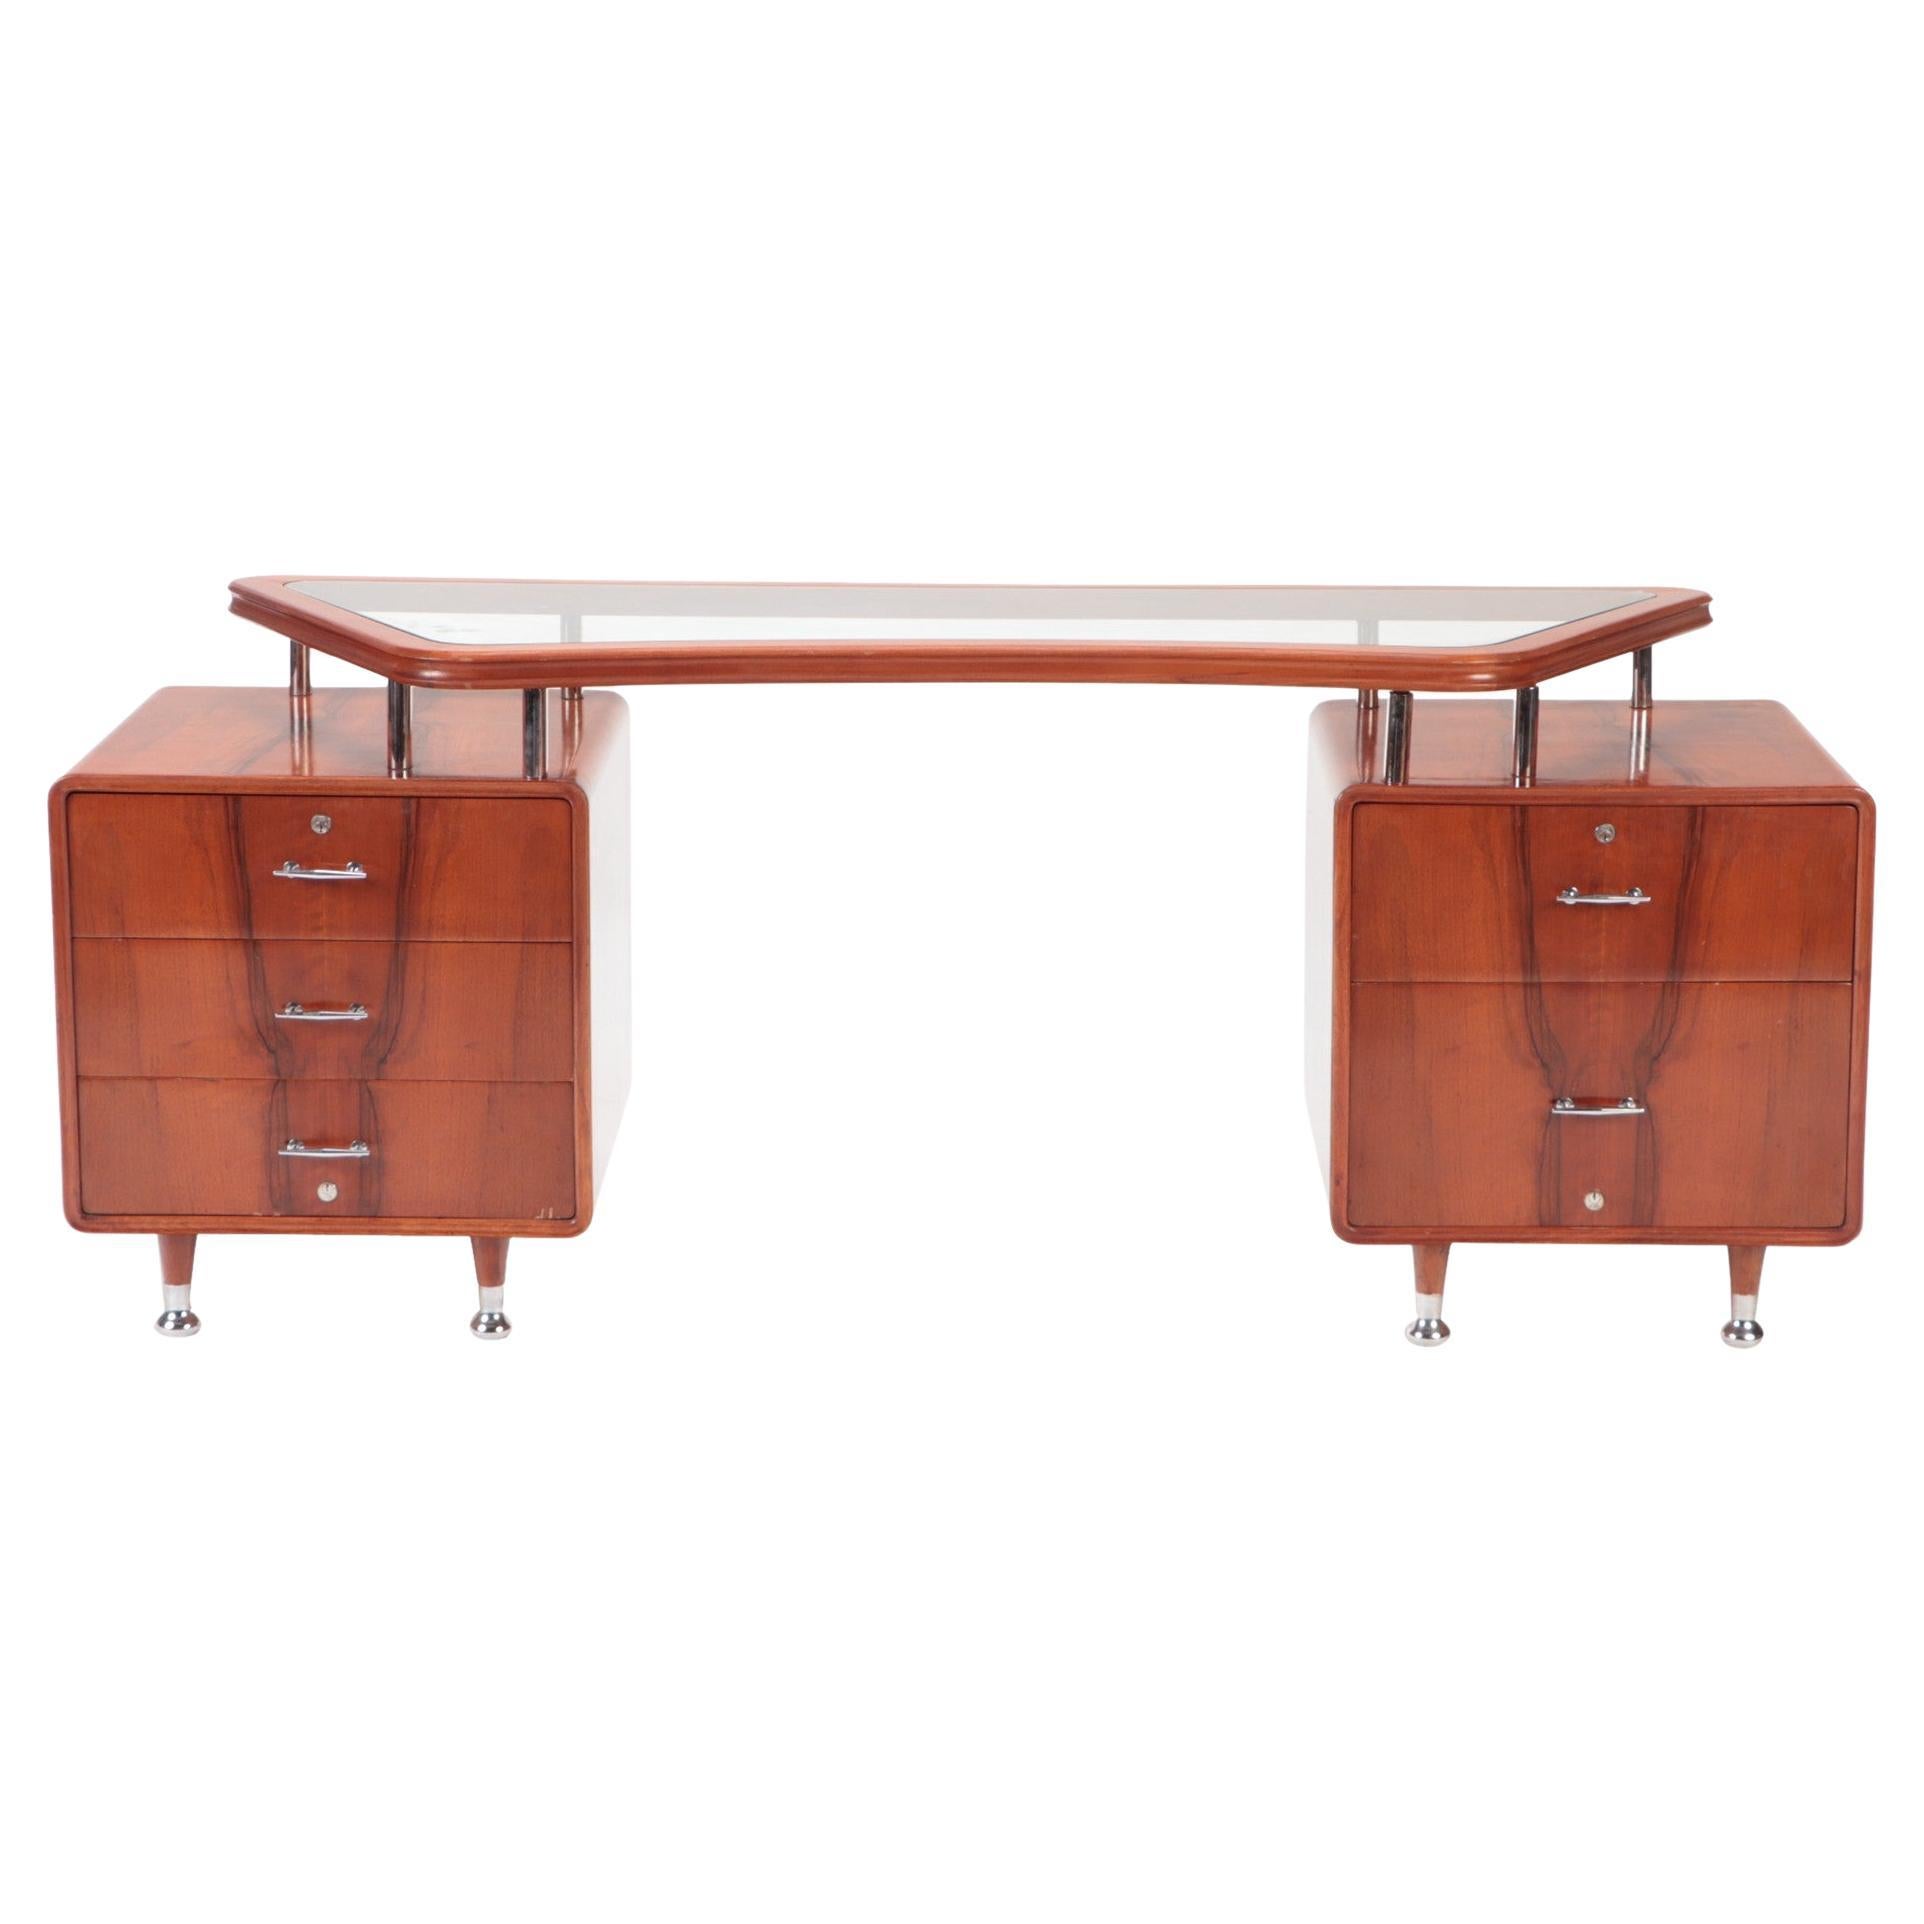 Double Pedestal Glass and Wood Desk with Chrome Mounts C 1960